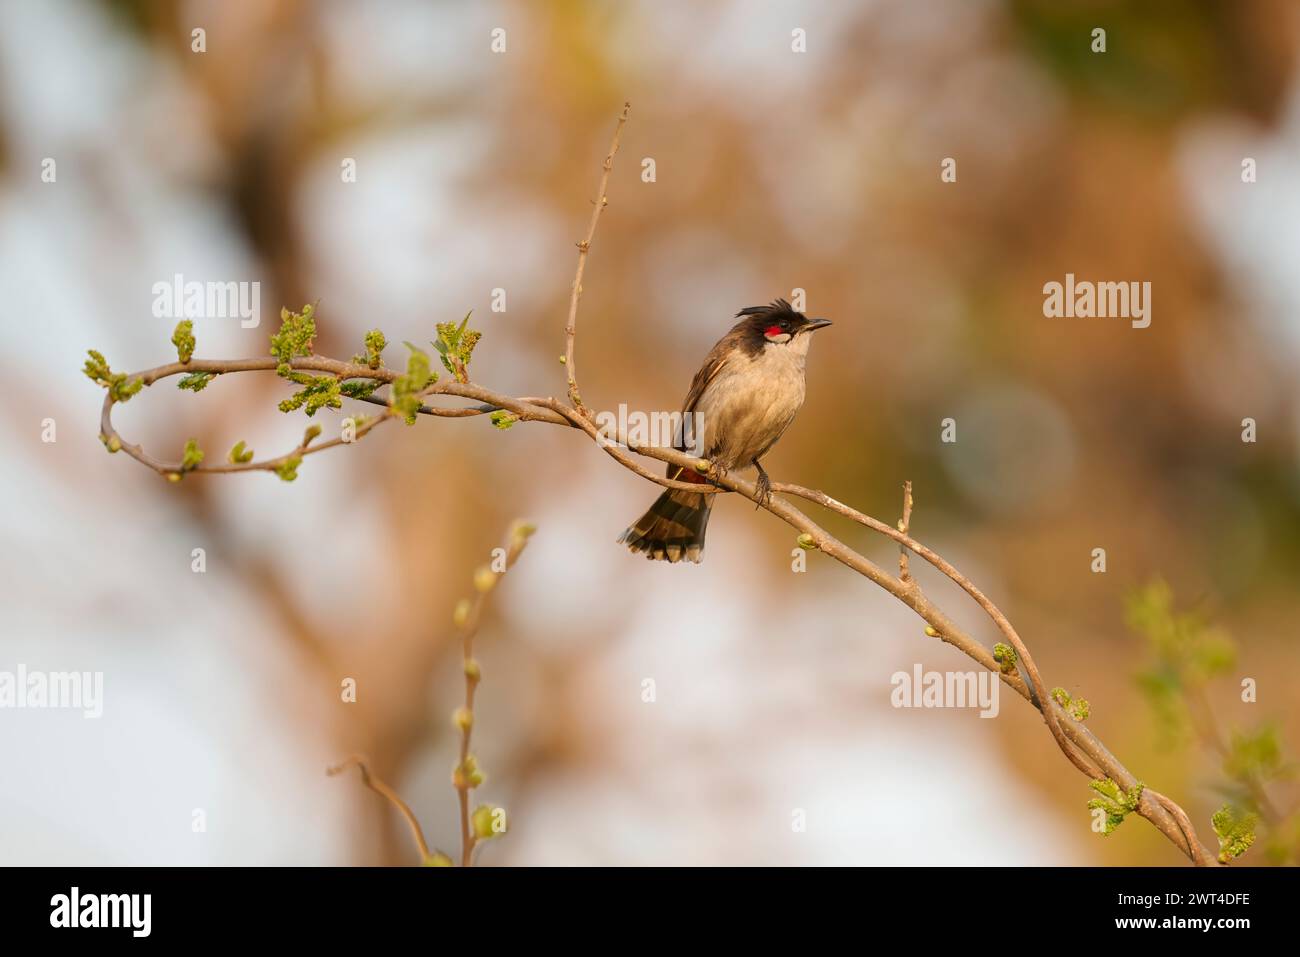 Red-whiskered bulbul perched on a branch, India Stock Photo